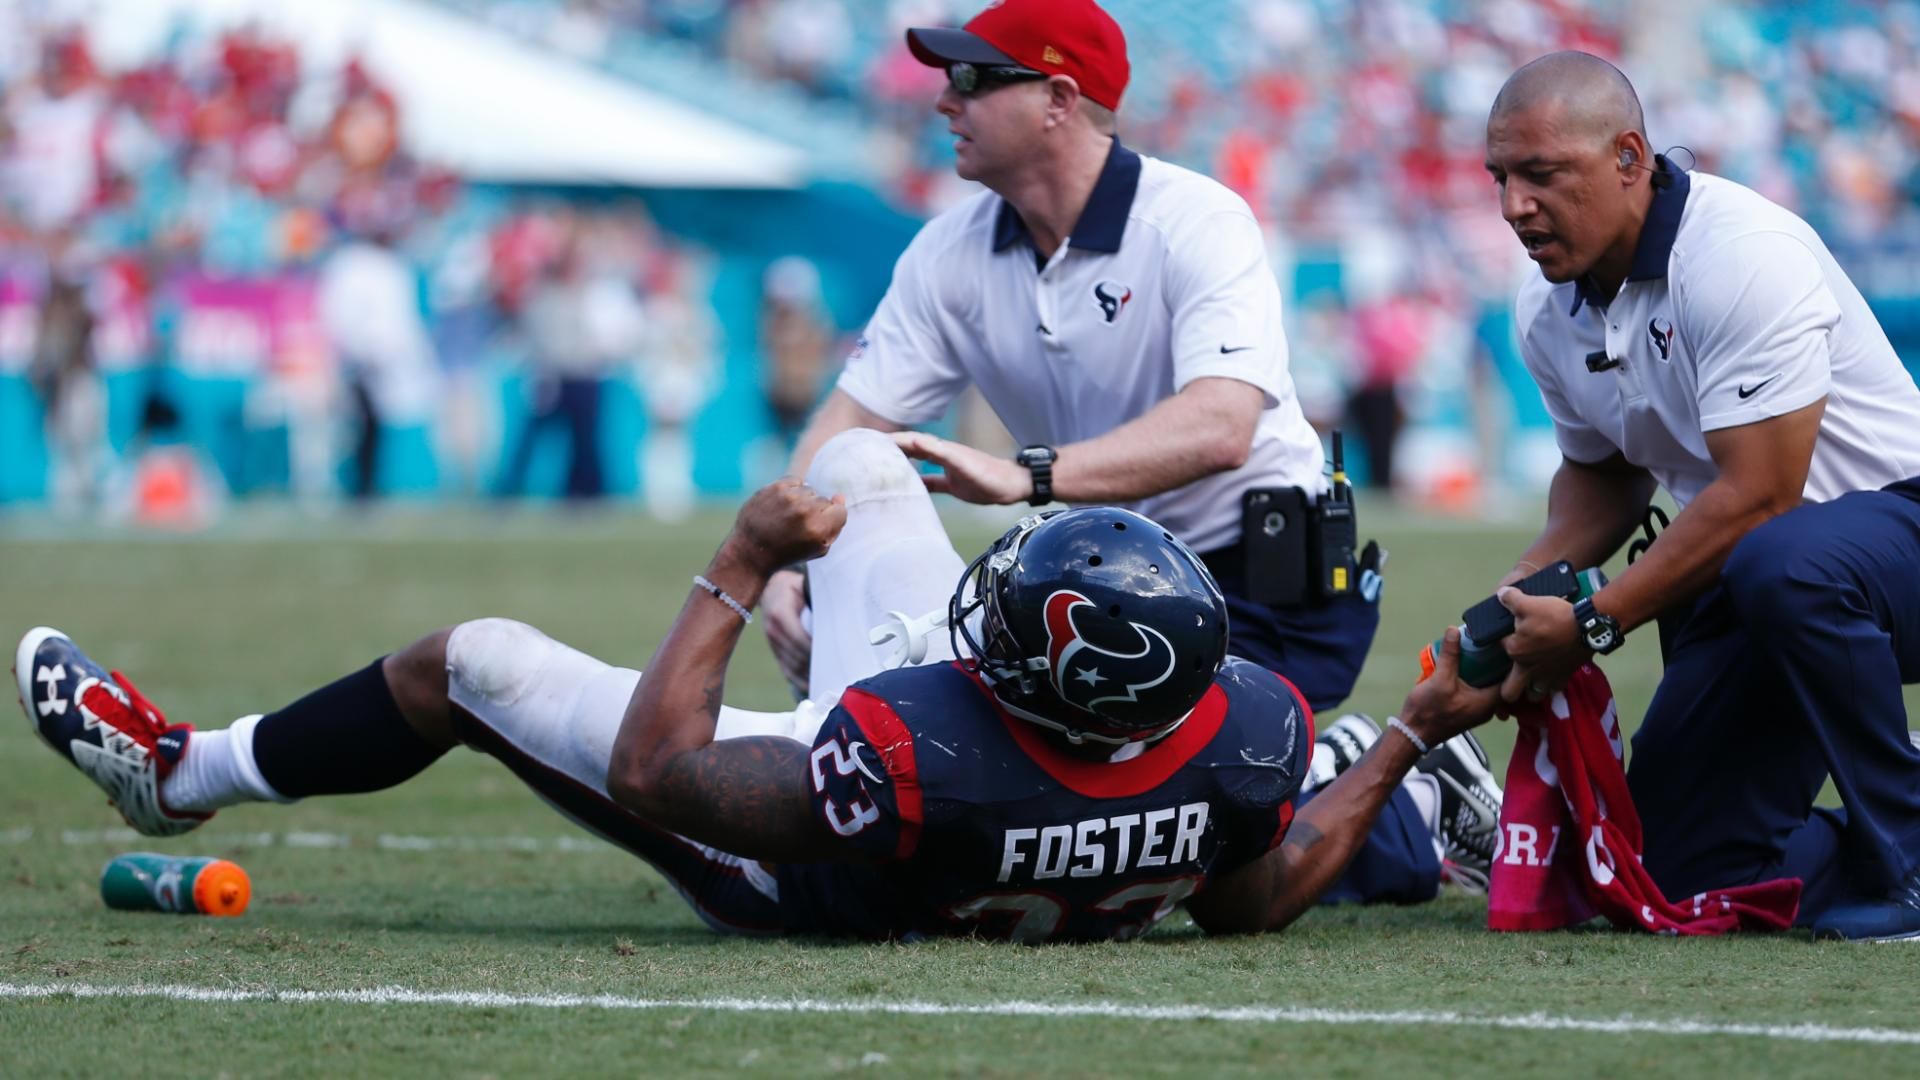 Foster's injury could spell end of run in Houston